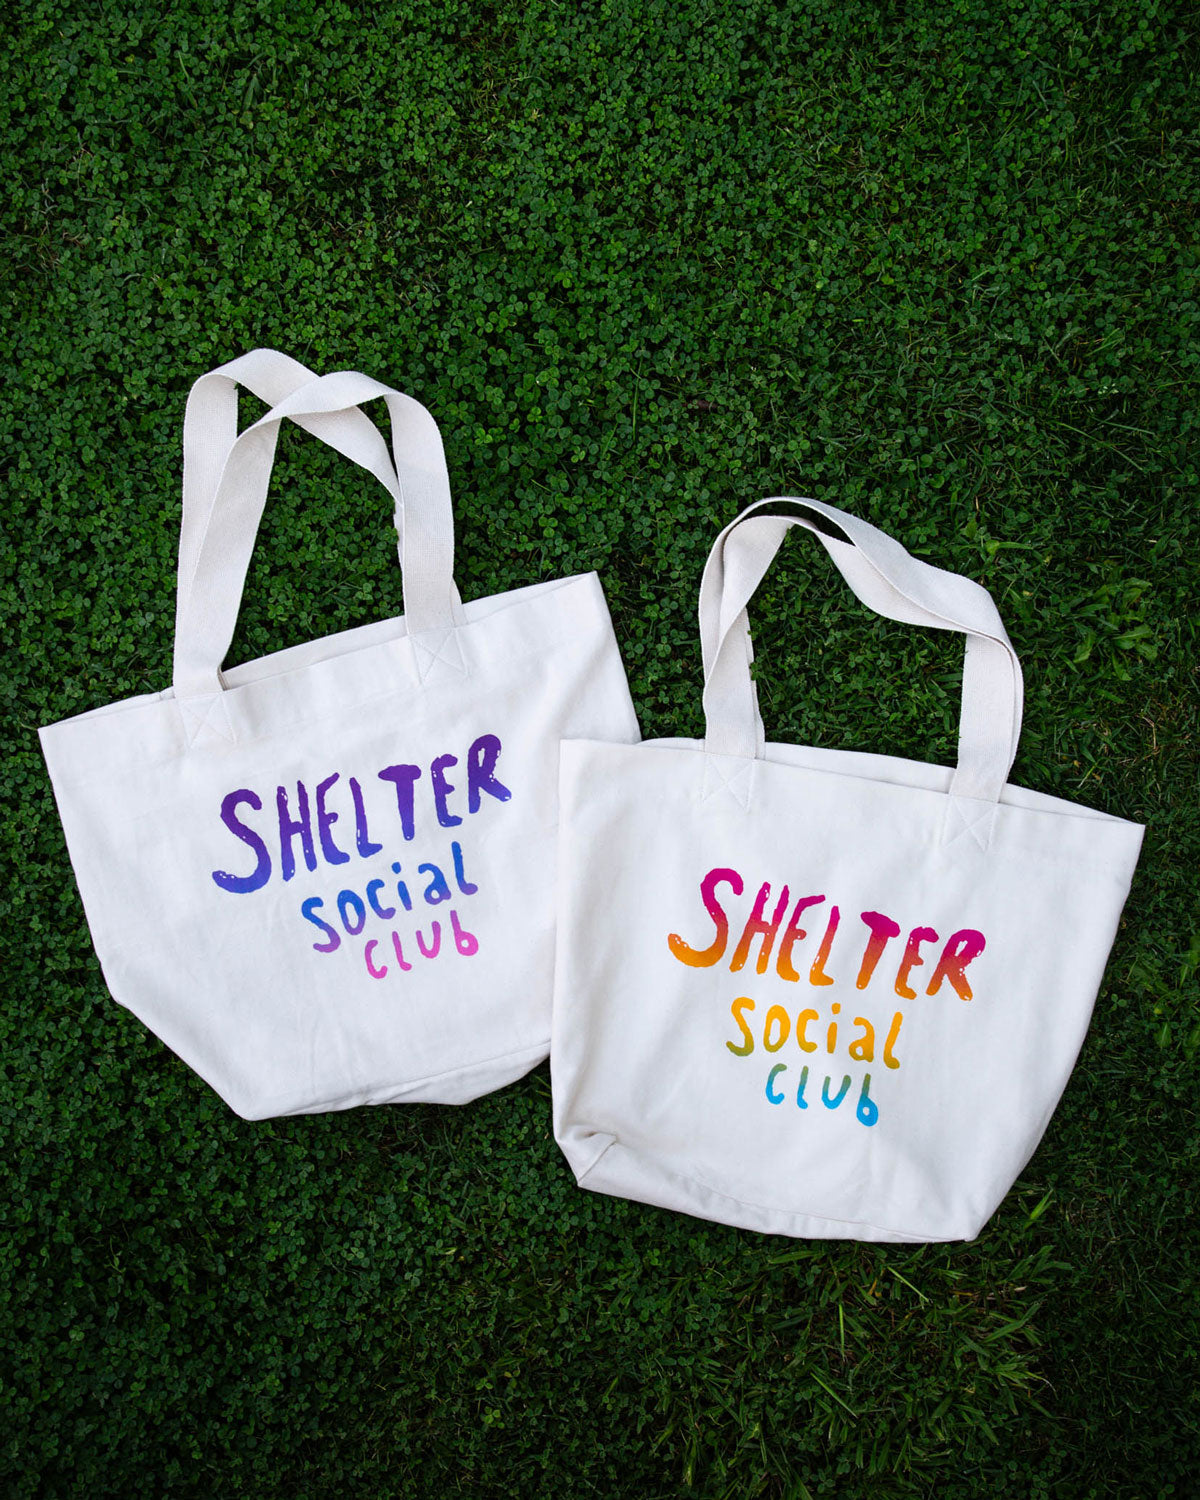 SSC GRADIENT TOTE - Shelter Social Club